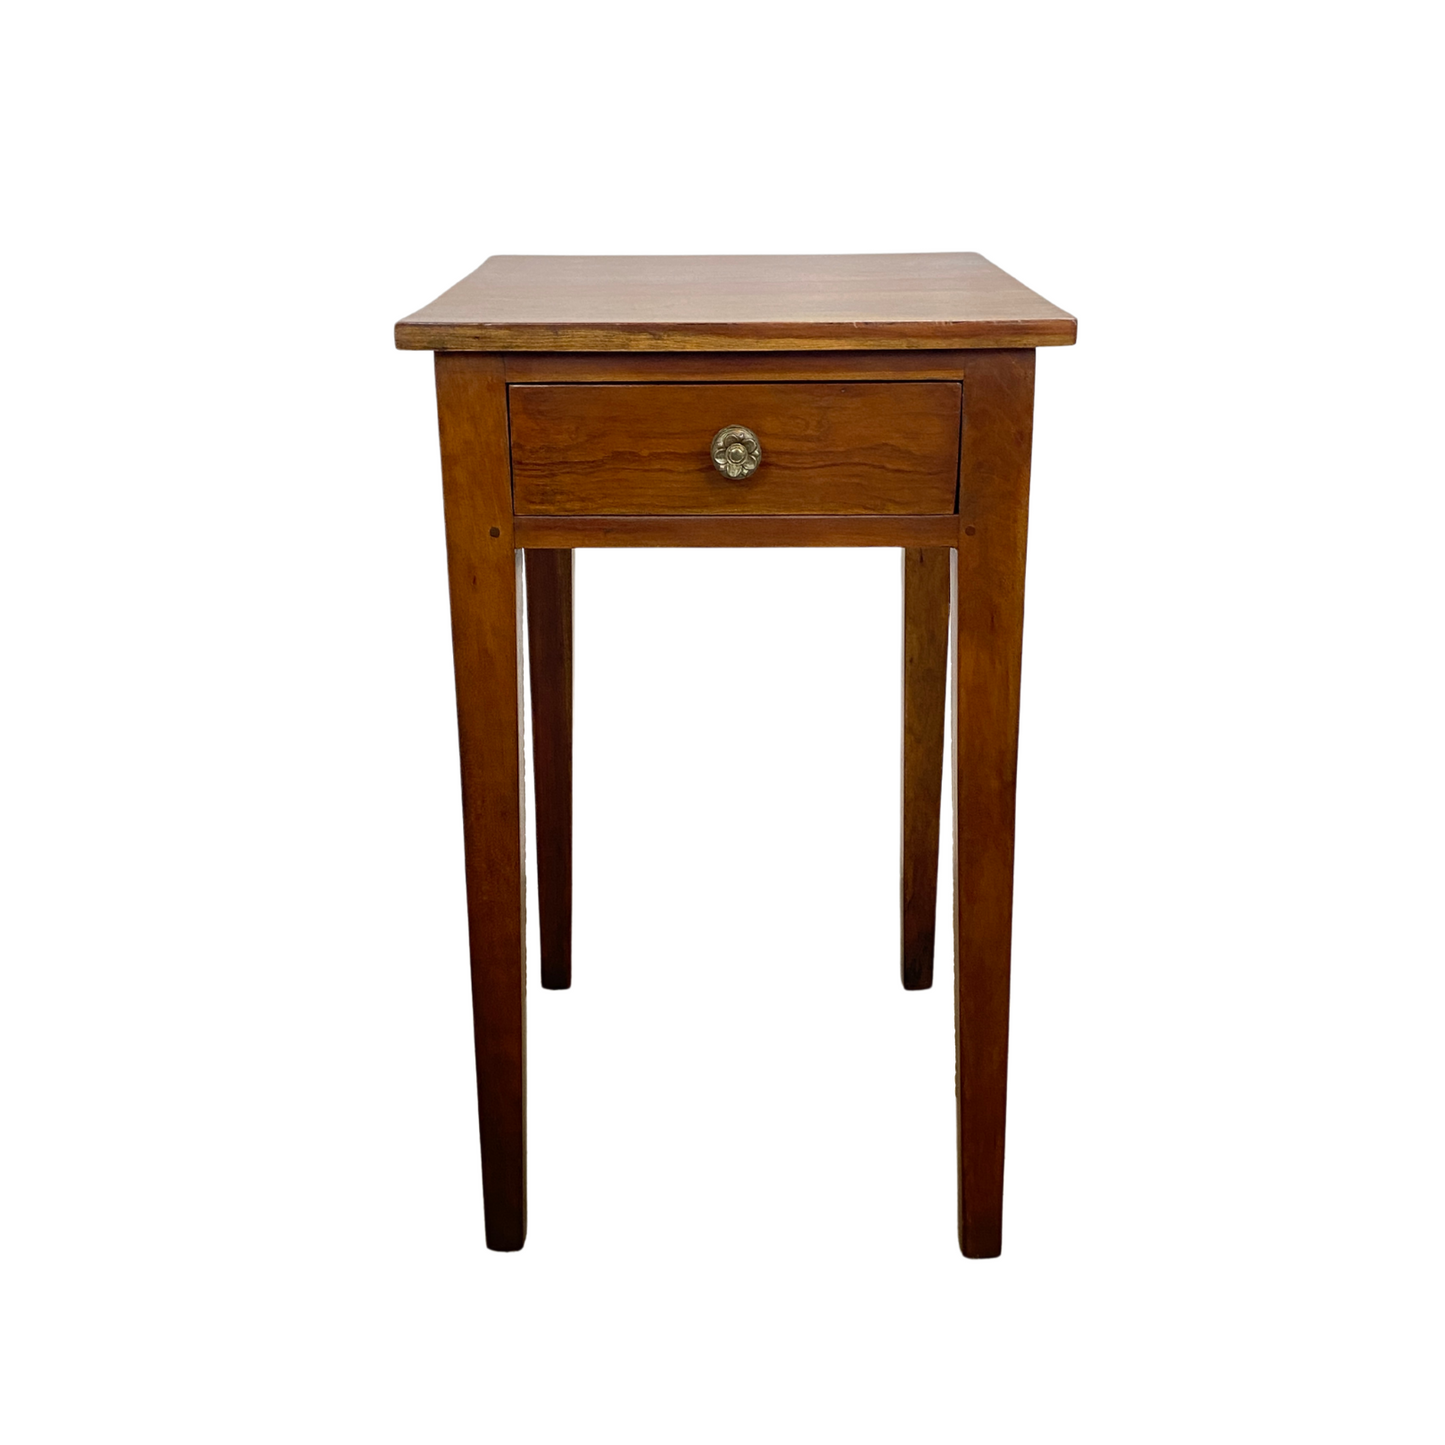 Antique Walnut Pegged Work Table / Night Stand